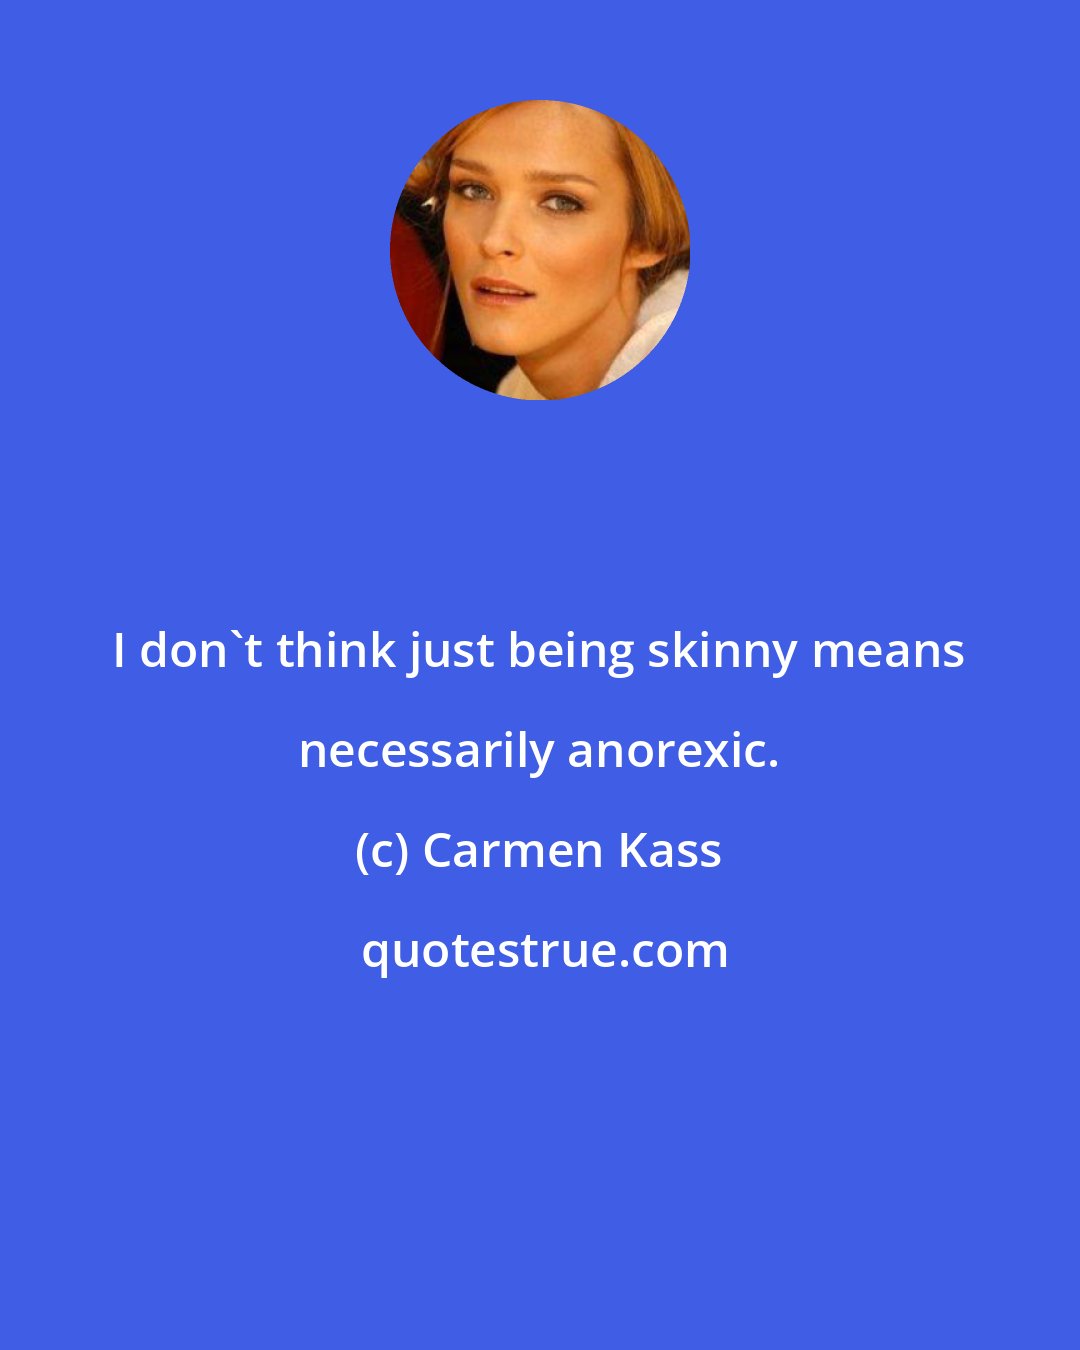 Carmen Kass: I don't think just being skinny means necessarily anorexic.